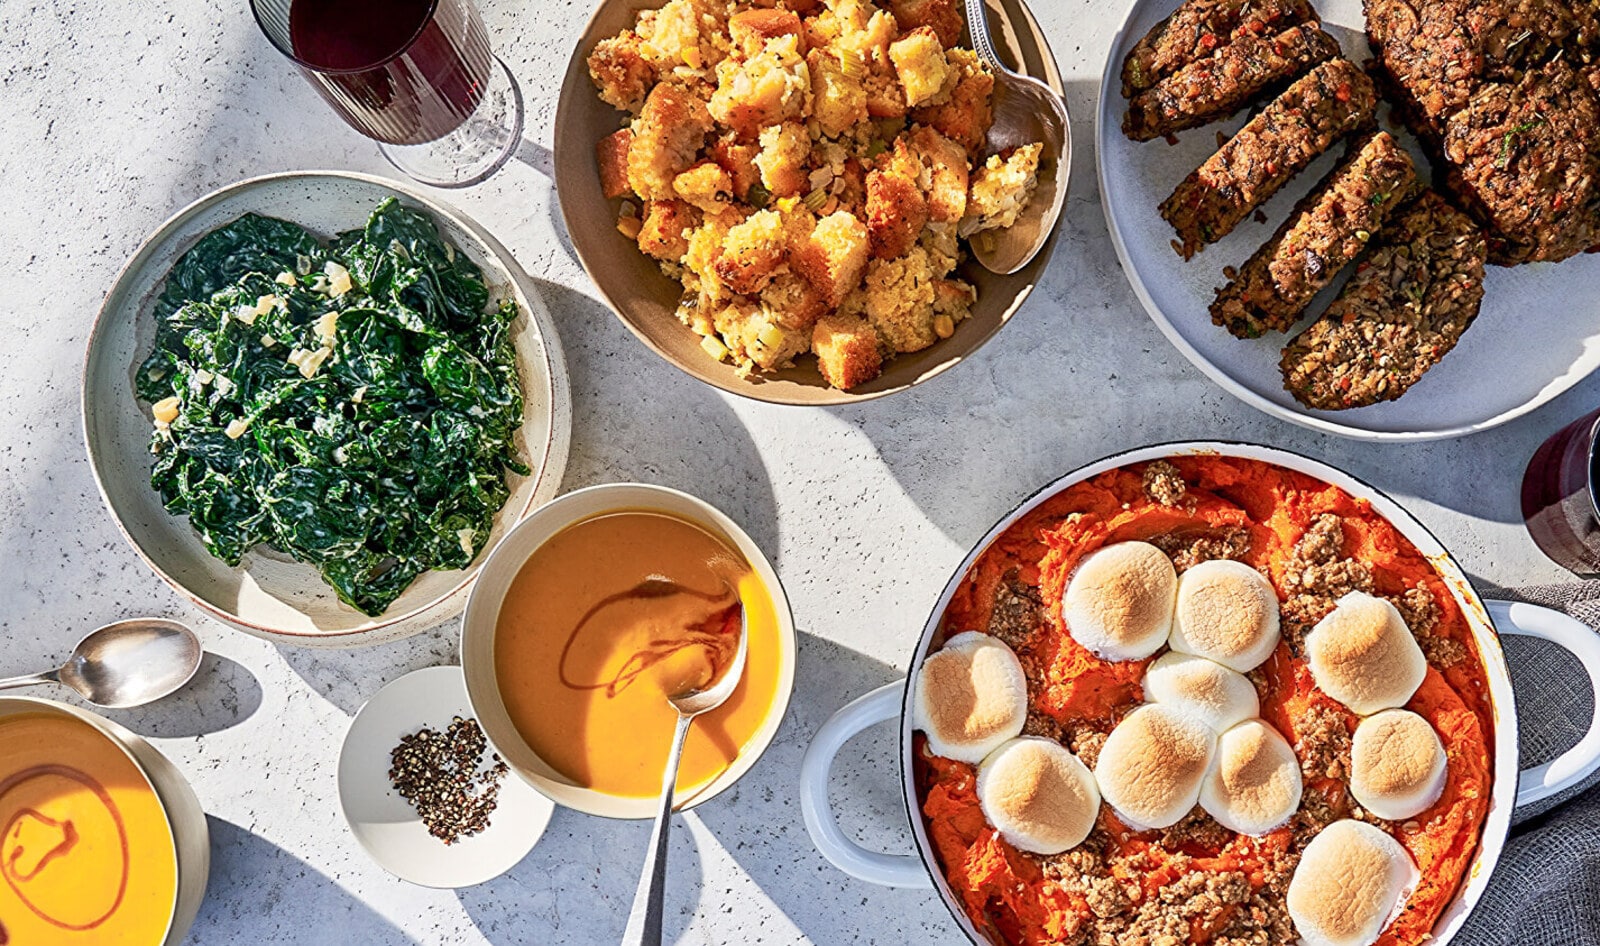 Let Chef Chloe Coscarelli Cook Thanksgiving Dinner. Here’s How to Get Her Vegan Roast.